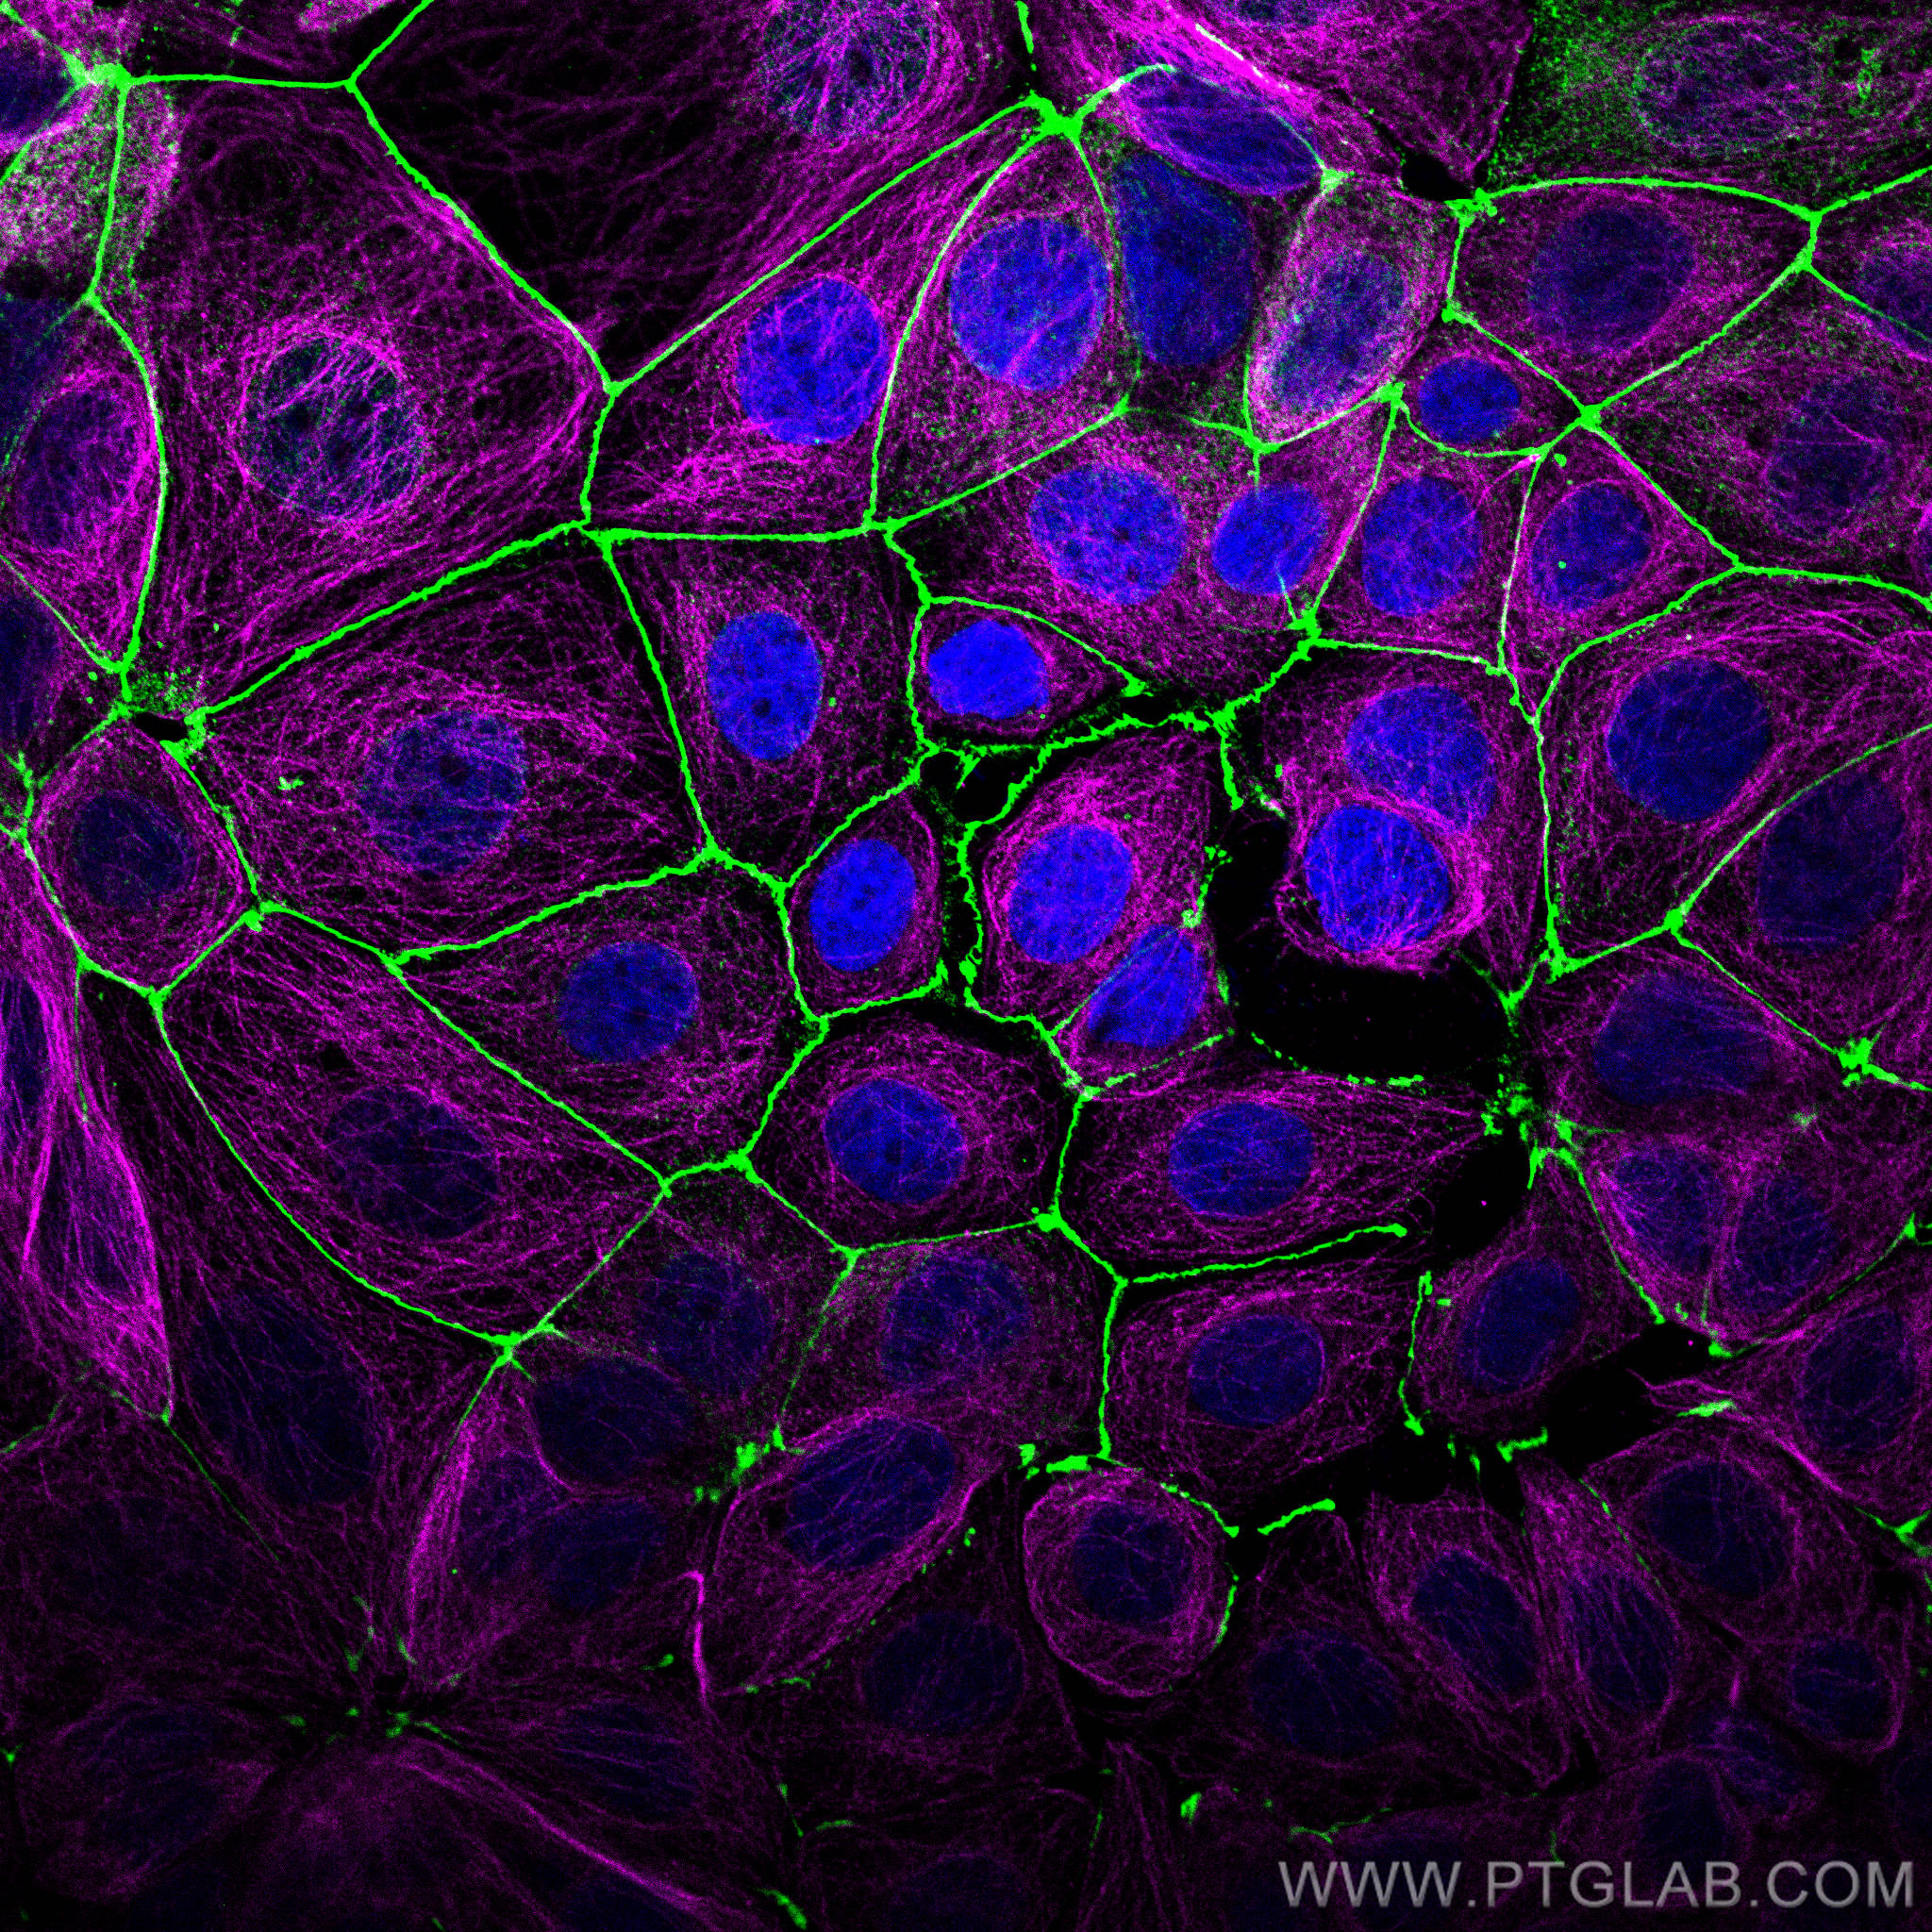 Immunofluorescence of MCF-7 cells: MCF-7 cells were fixed with 4% PFA and stained with Rabbit anti-ZO1 polyclonal antibody (21773-1-AP, 1:2000, green) and mouse anti-Alpha Tubulin monoclonal antibody (66031-1-Ig, 1:1000, magenta). Multi-rAb CoraLite® Plus 488-Goat Anti-Rabbit Recombinant Secondary Antibody (H+L) (RGAR002, 1:500) and Multi-rAb CoraLite® Plus 647-Goat Anti-Mouse Recombinant Secondary Antibody (H+L) (RGAM005, 1:500) were used for detection. 